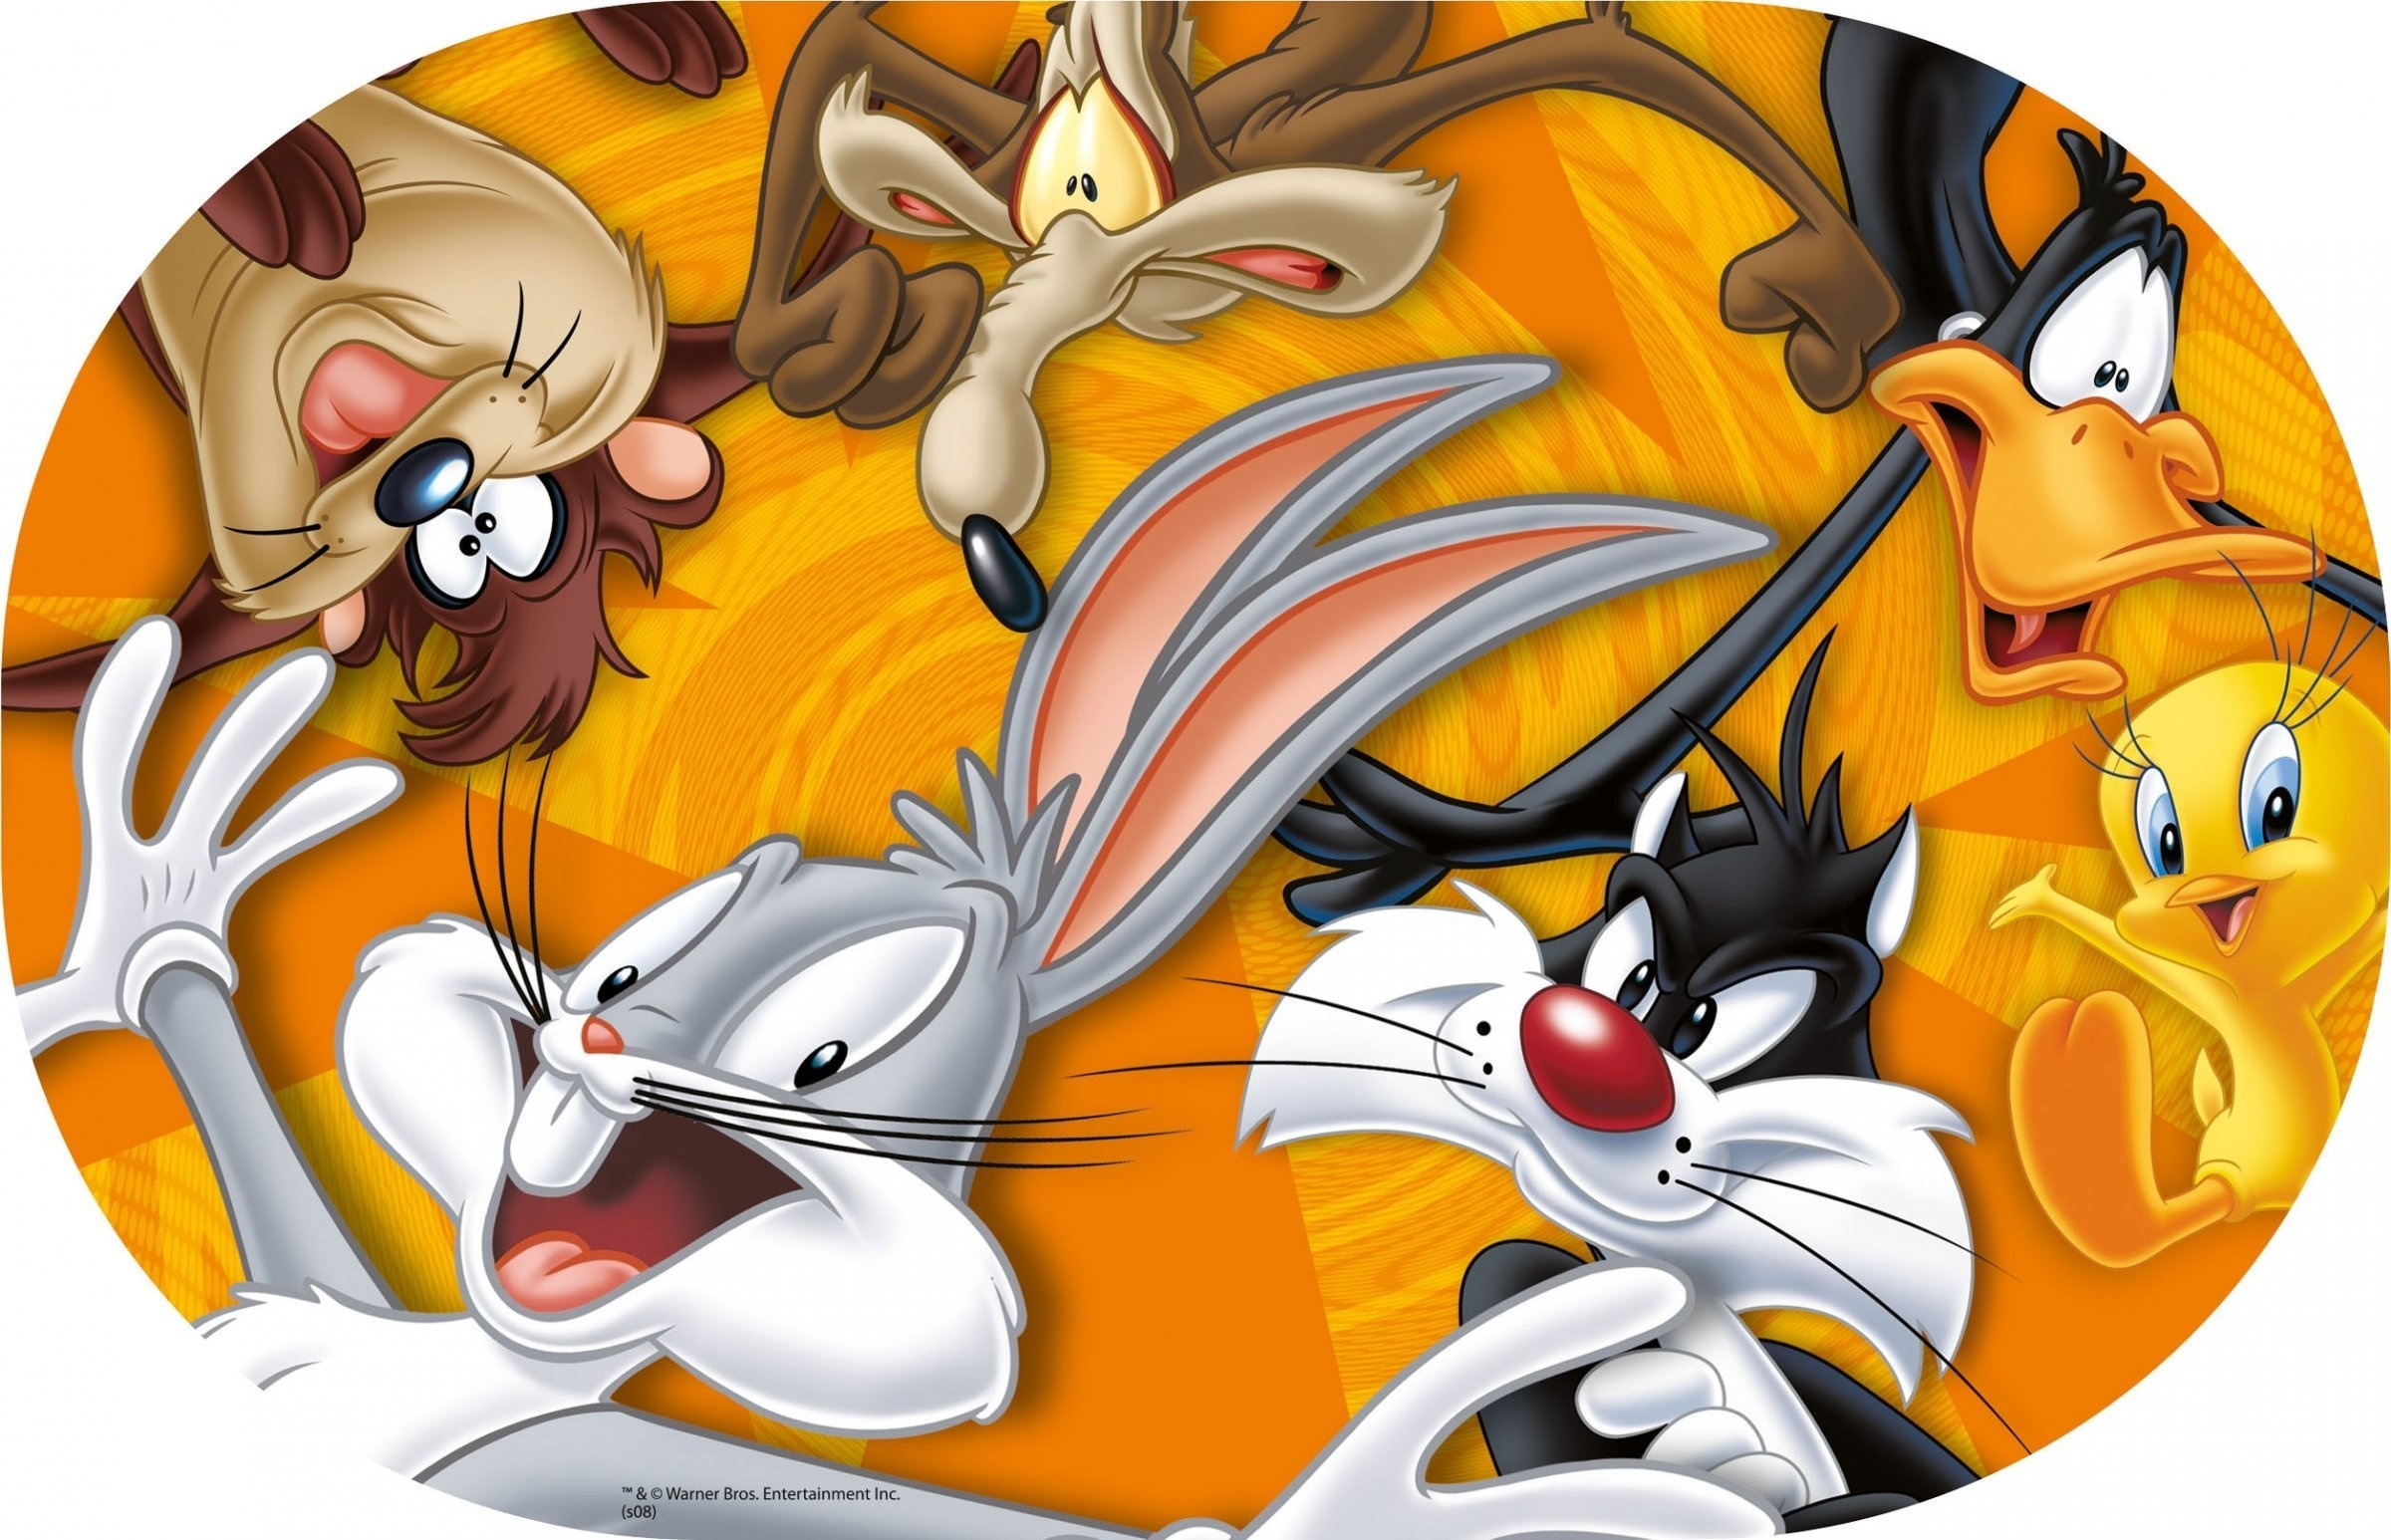 2400x1546 Wallpaper | Movies | photo | picture | bugs Bunny, the cat Sylvester, Looney tunes, daffy duck, Tweety